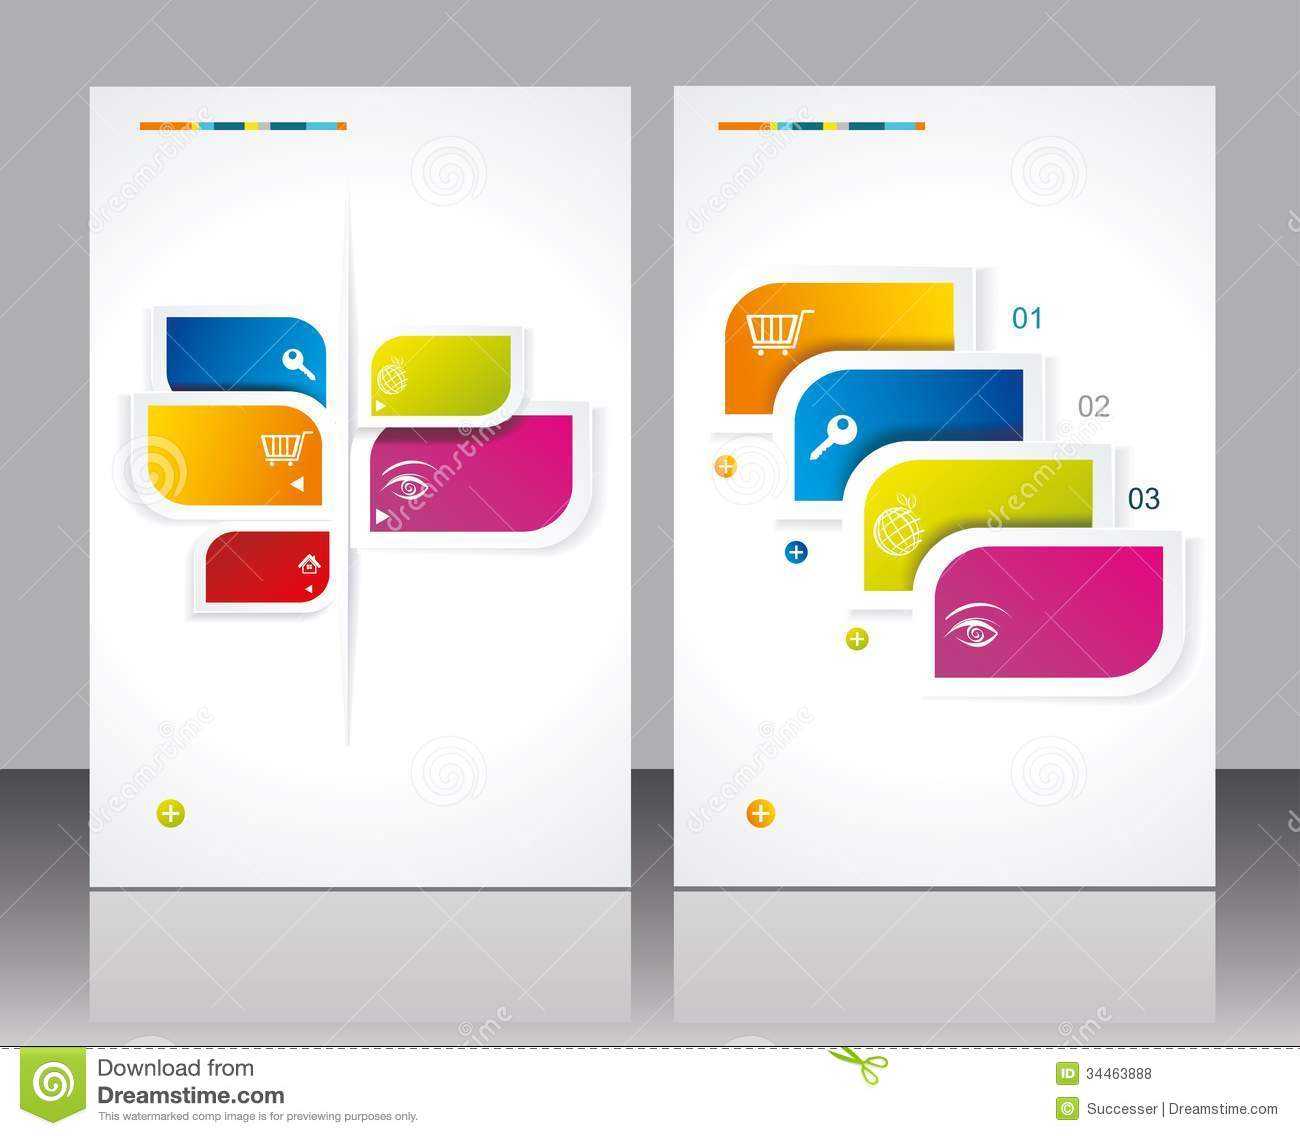 16 Vector Brochures Templates Images – Free Vector Brochure For Creative Brochure Templates Free Download